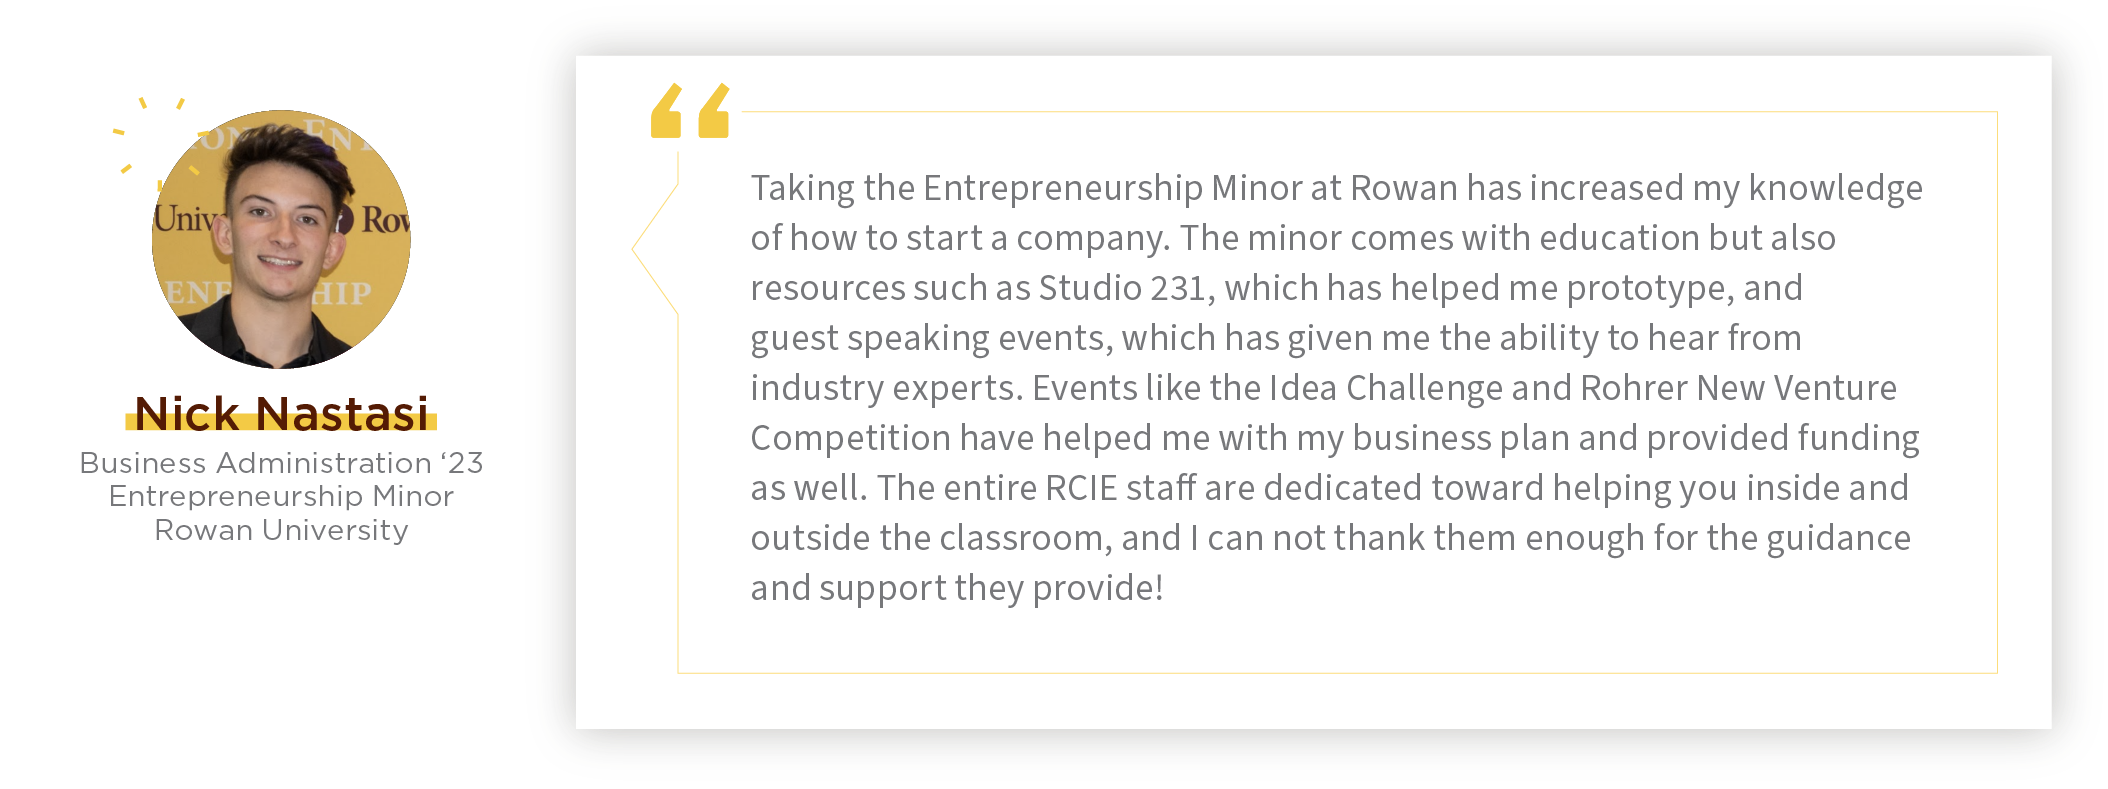 “Taking the Entrepreneurship Minor at Rowan has increased my knowledge of how to start a company. The minor comes with education but also resources! Resources like Studio 231 have helped me prototype and guest speaking events have given me the abilit